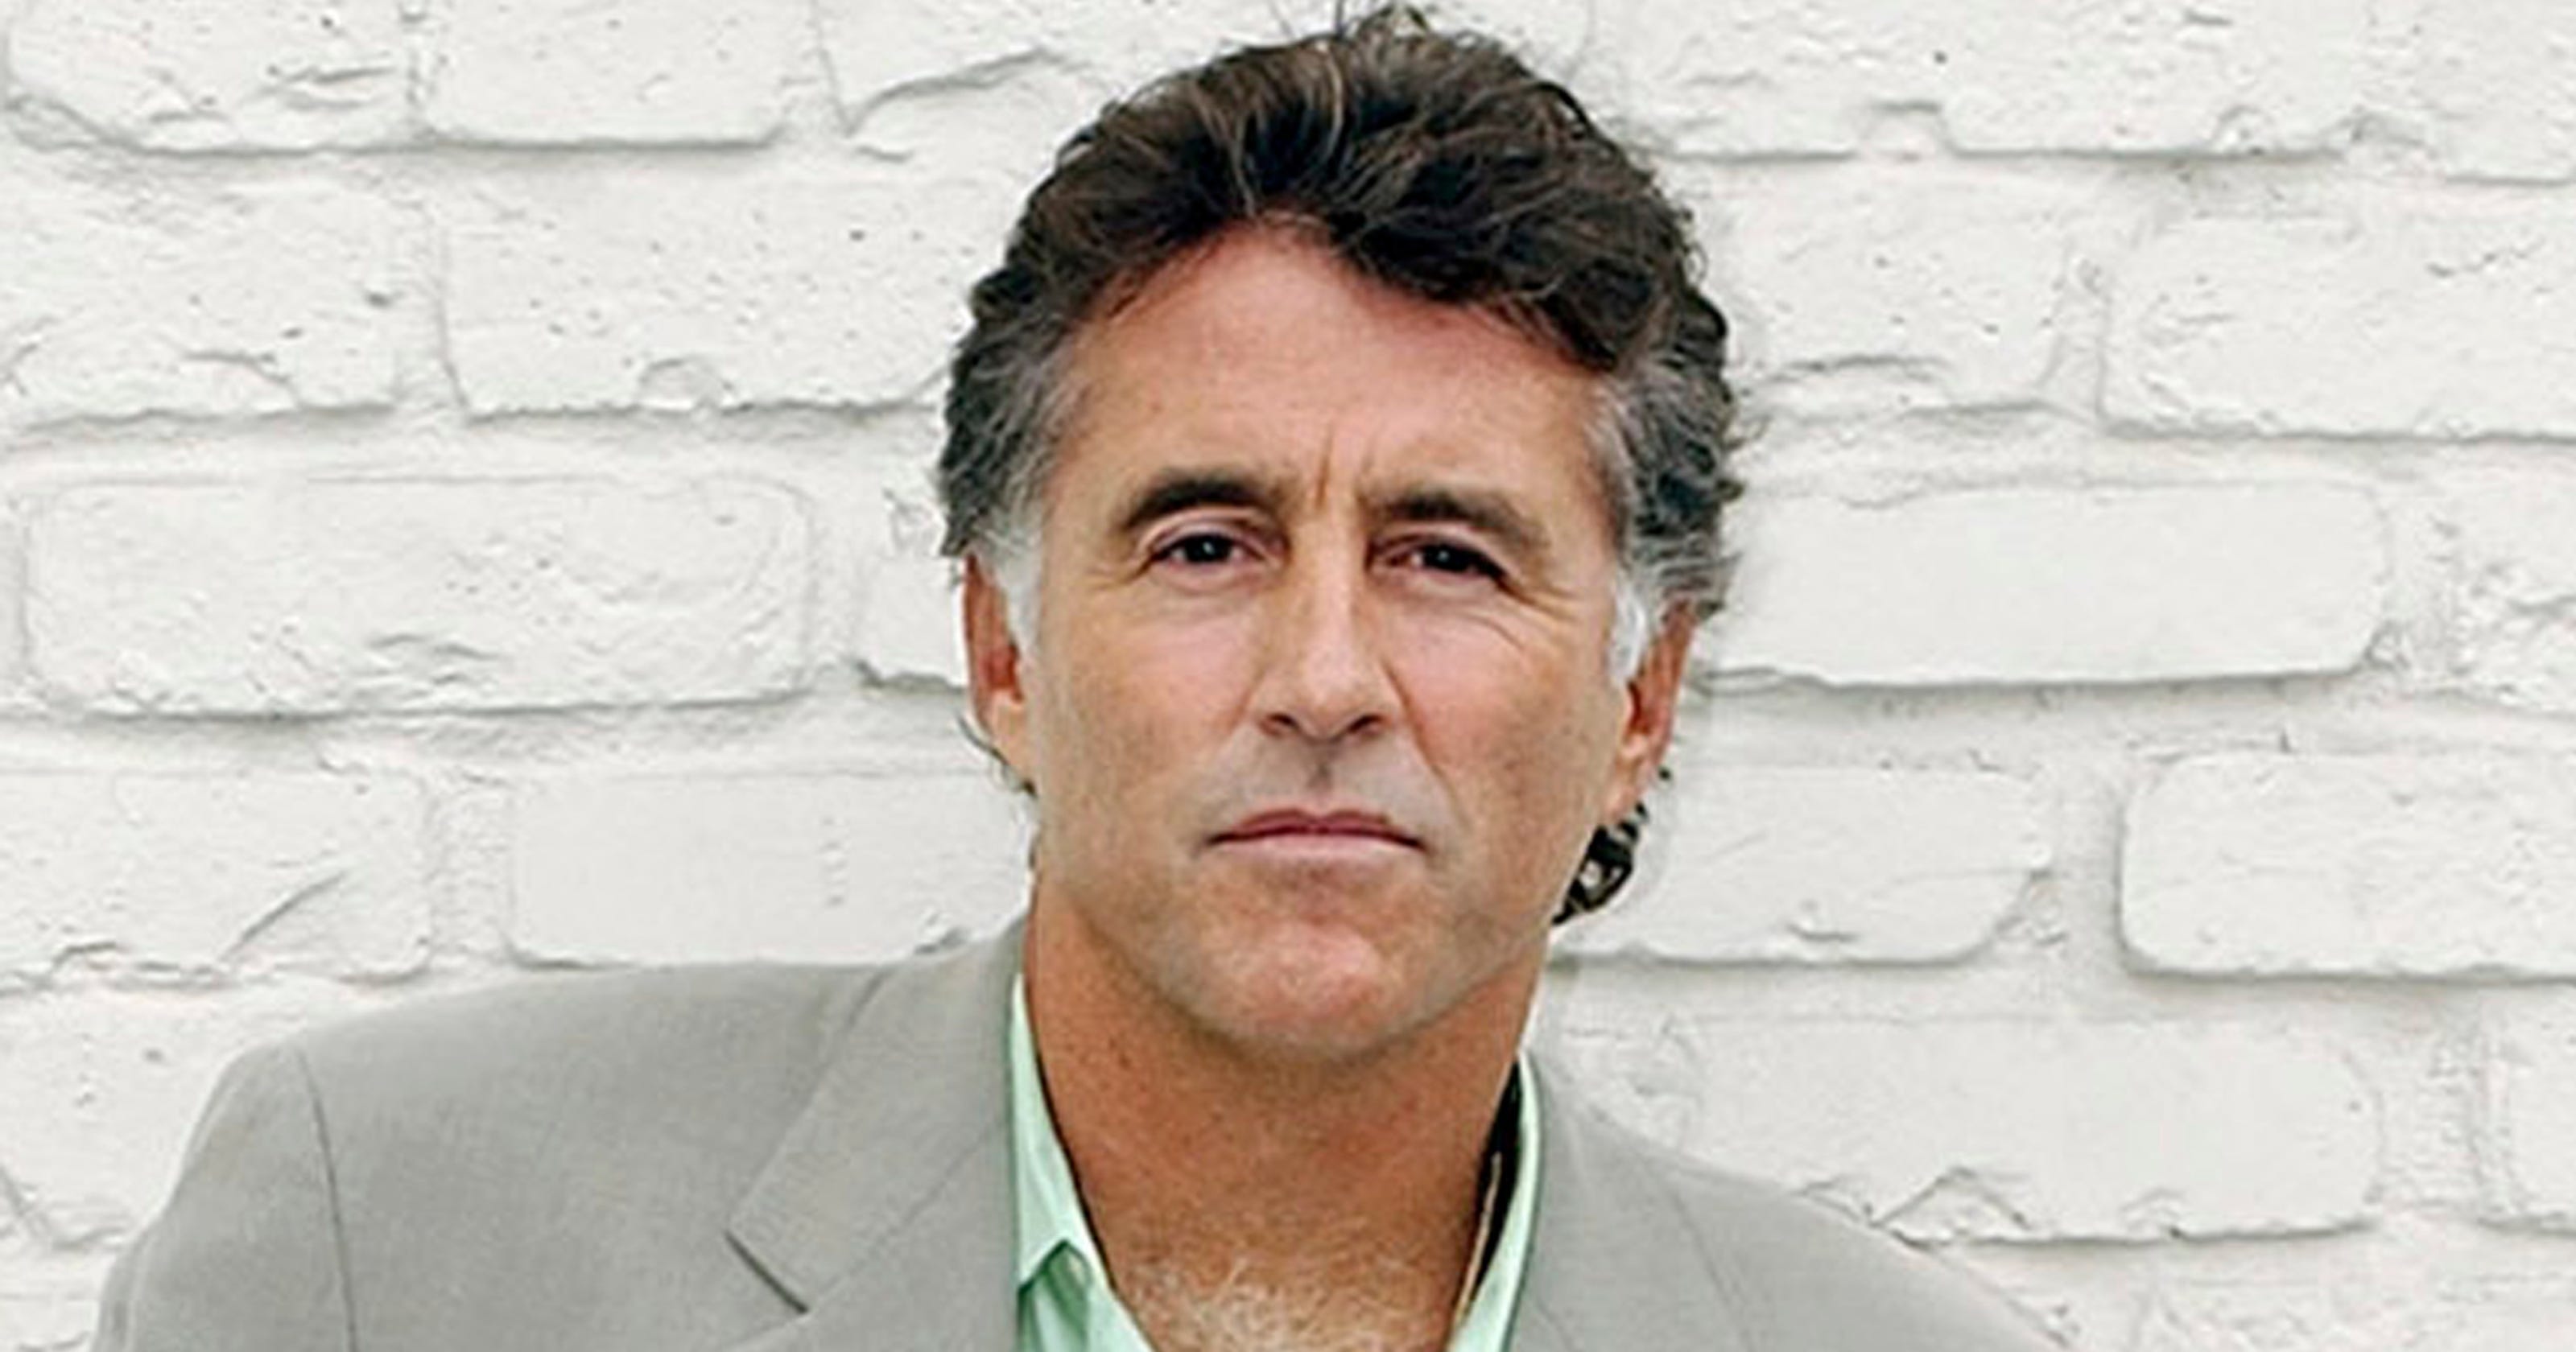 IMG CHRISTOPHER LAWFORD, Actor, Author and Nephew of JFK